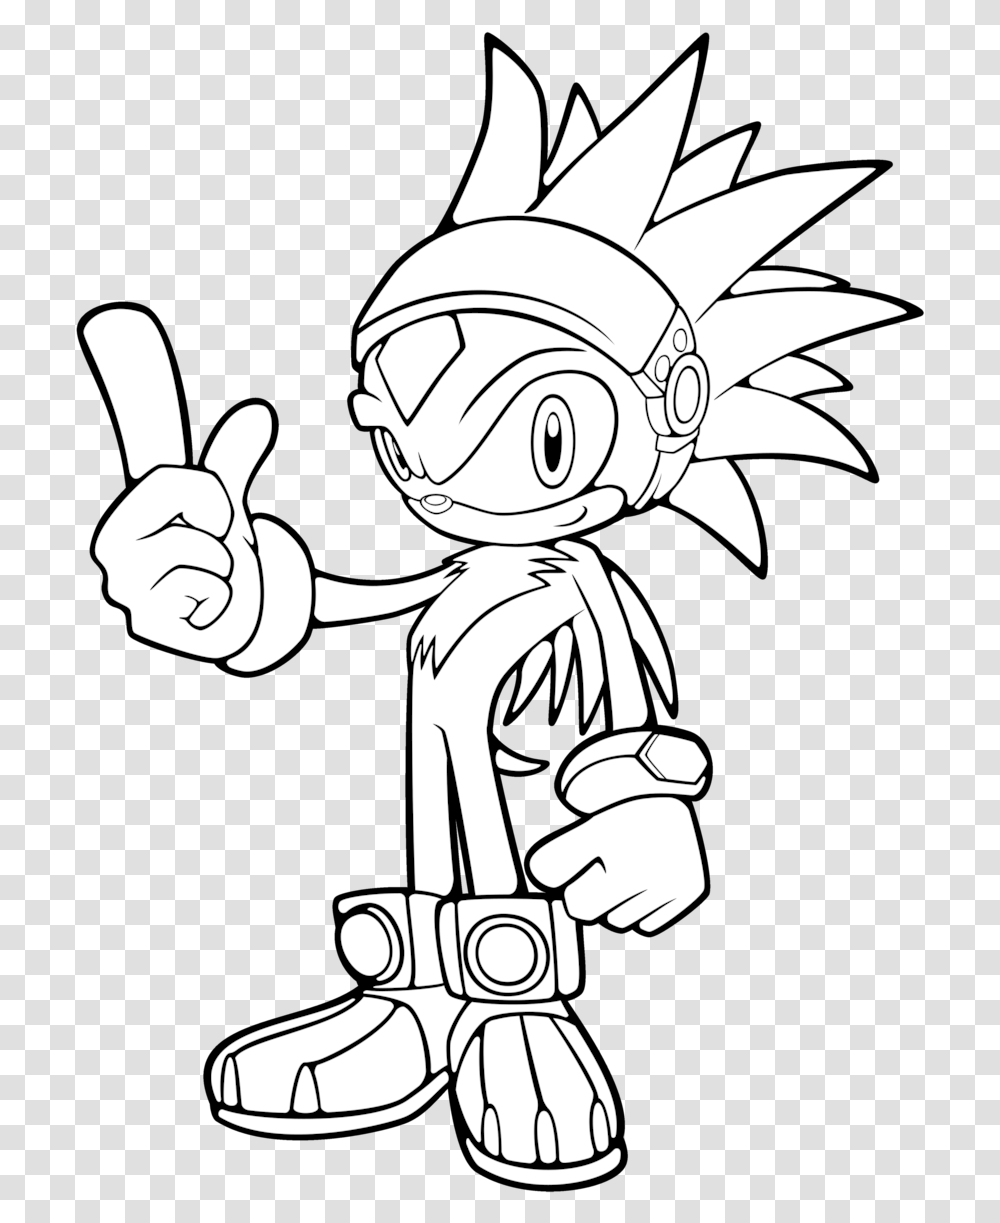 Odd Silver The Hedgehog Coloring Pages Silver The Hedgehog Prototype Transparent Png